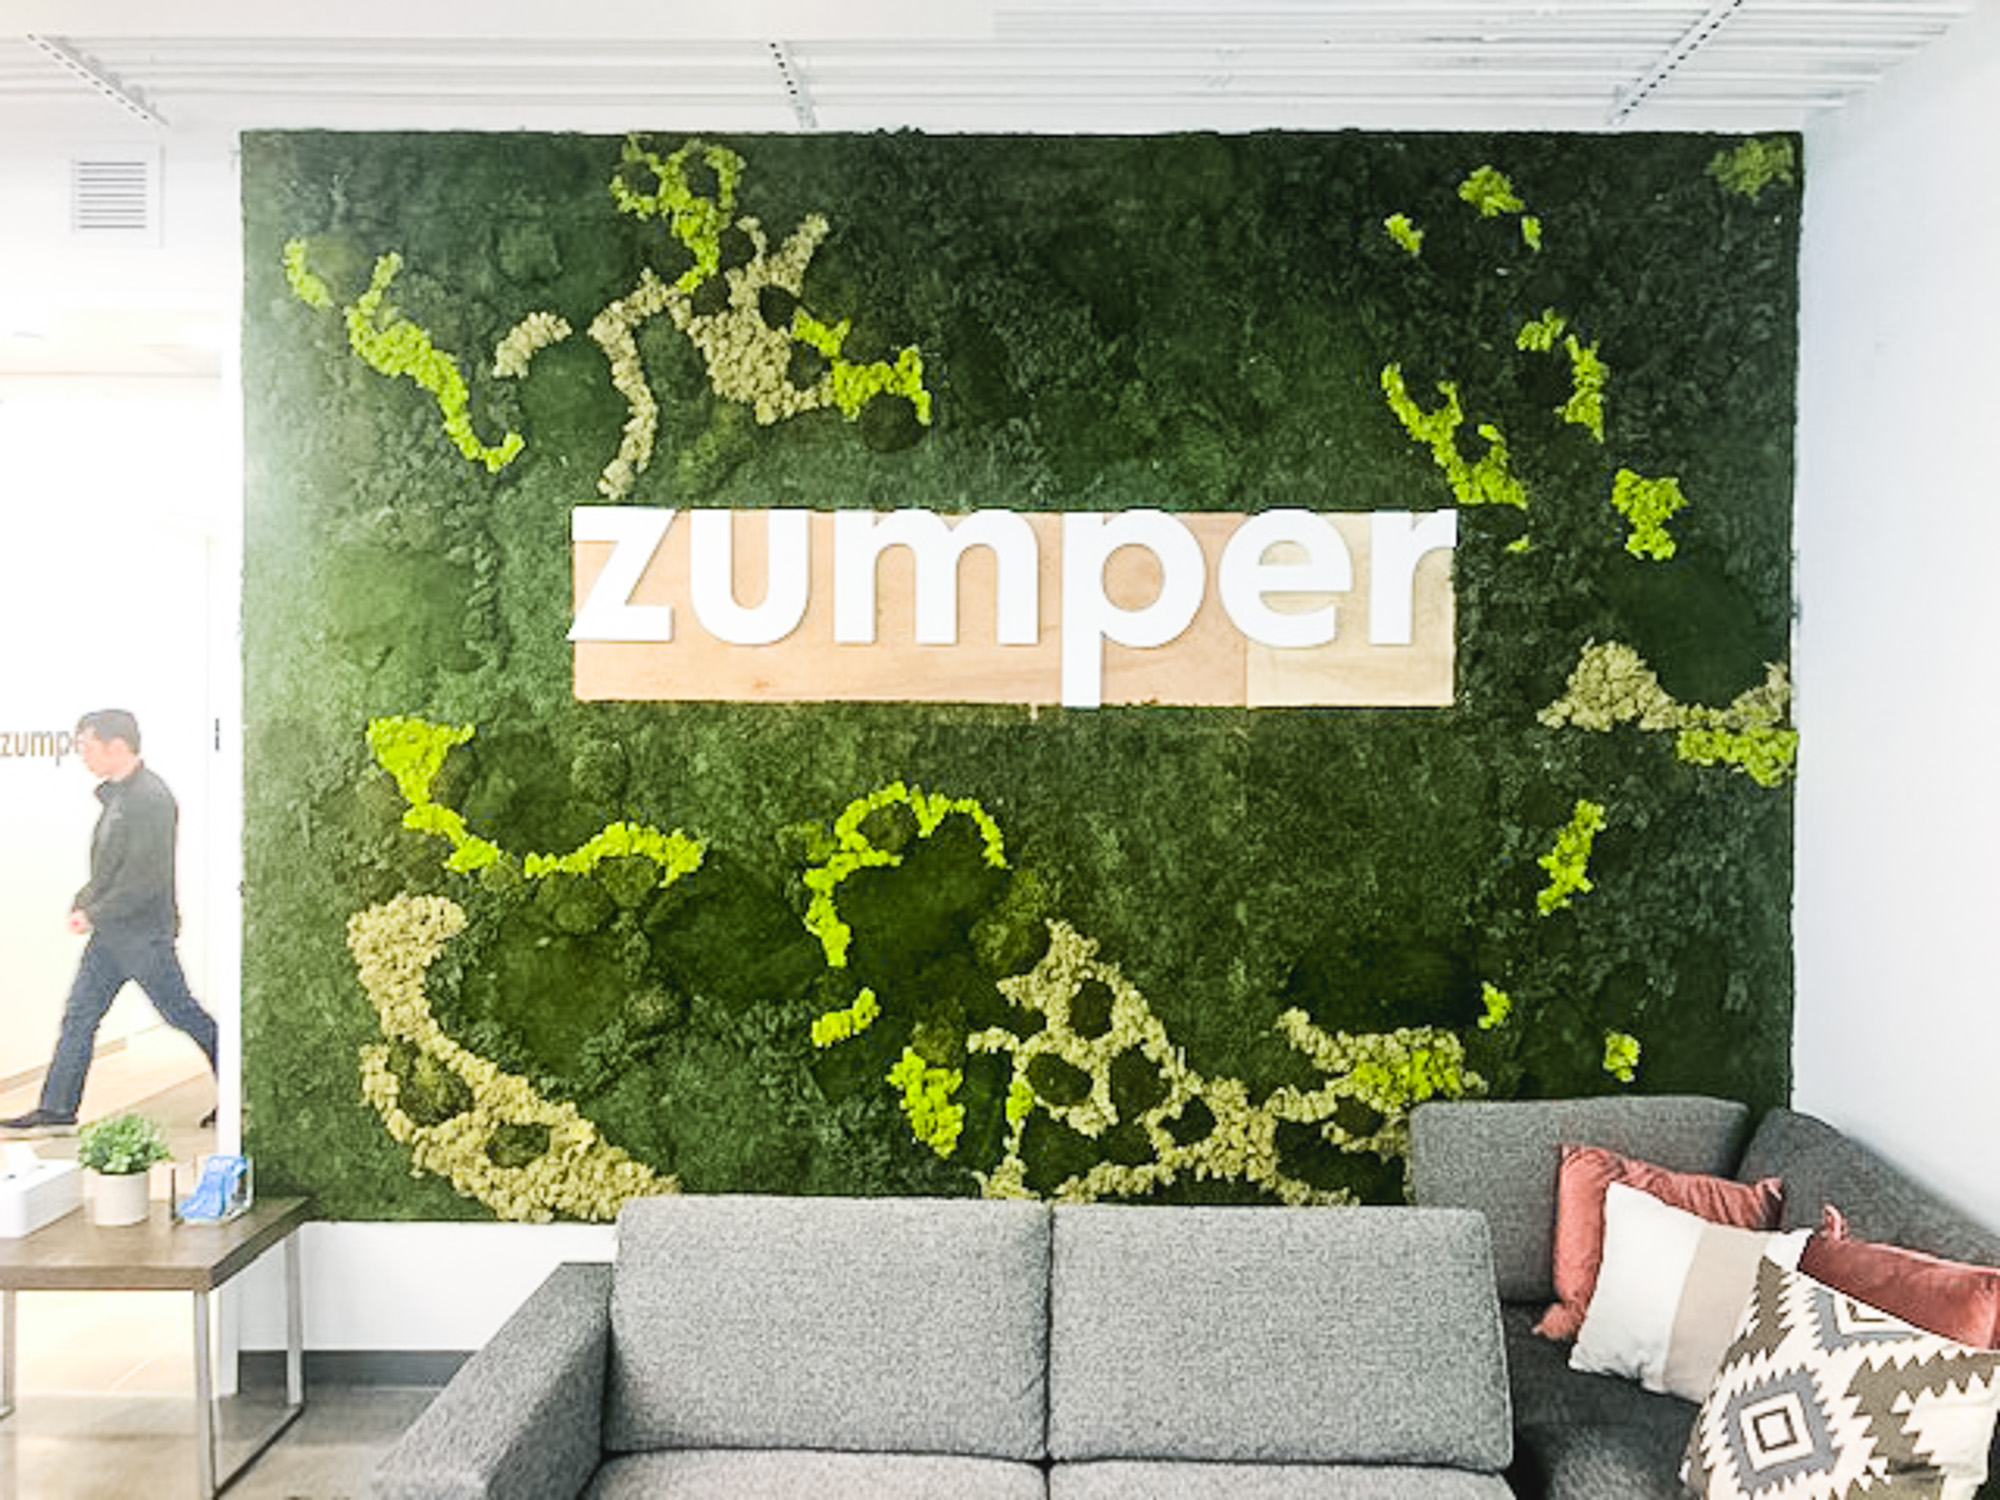 White letters on moss art wall for the lobby of Zumper, a full-service rental platform.